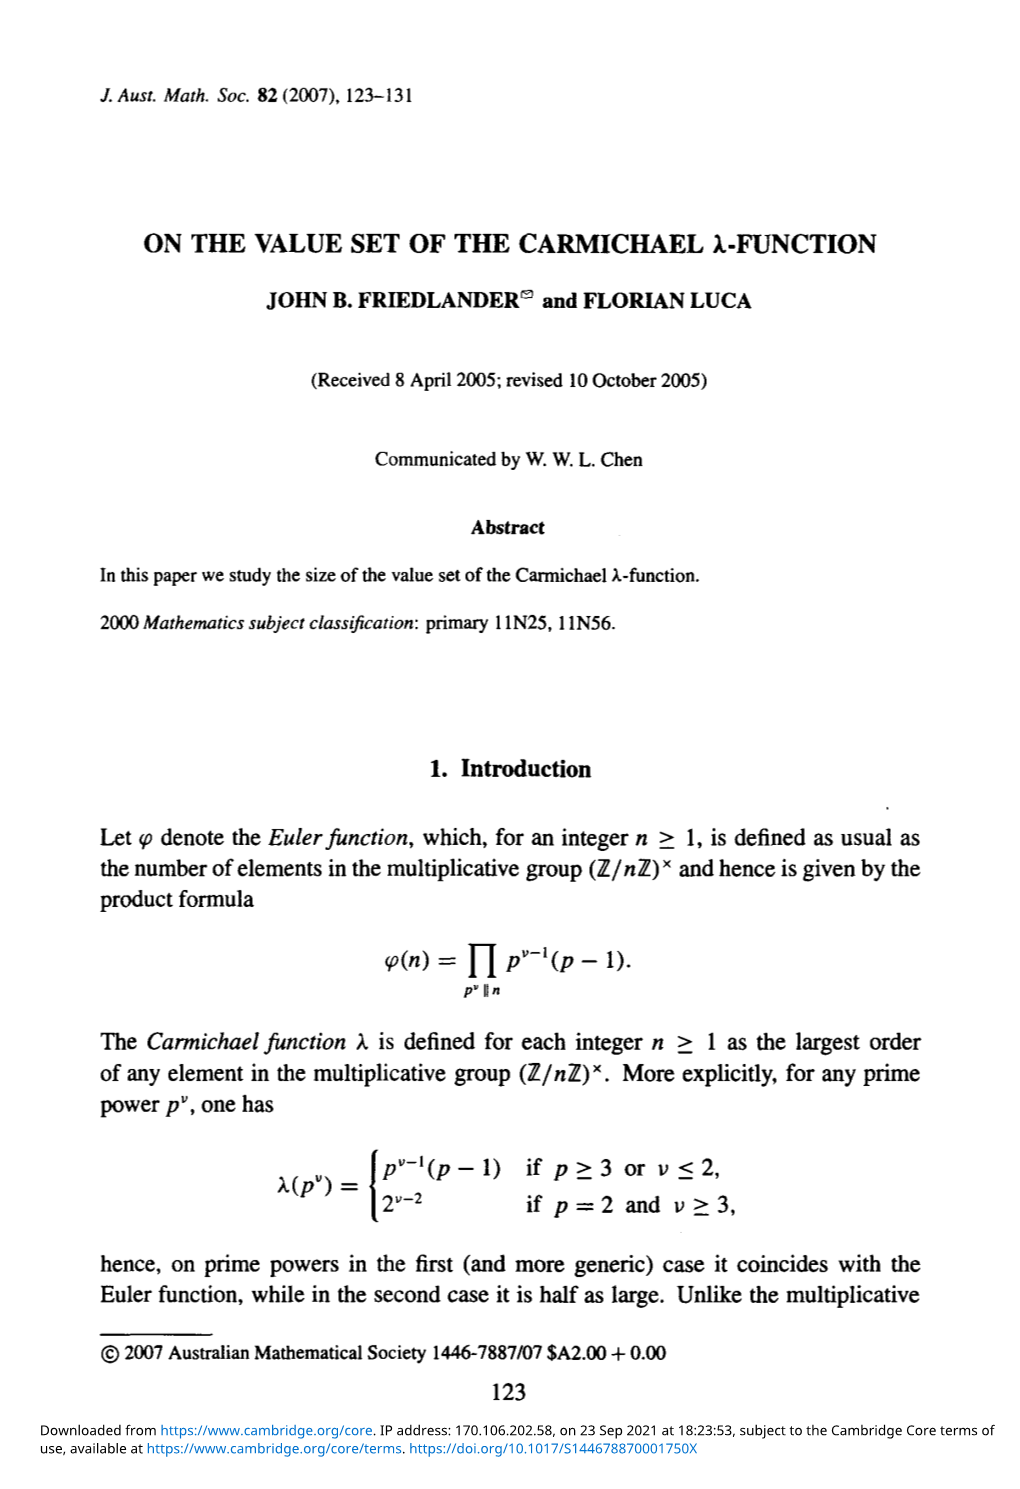 On the Value Set of the Carmichael Λ-Function